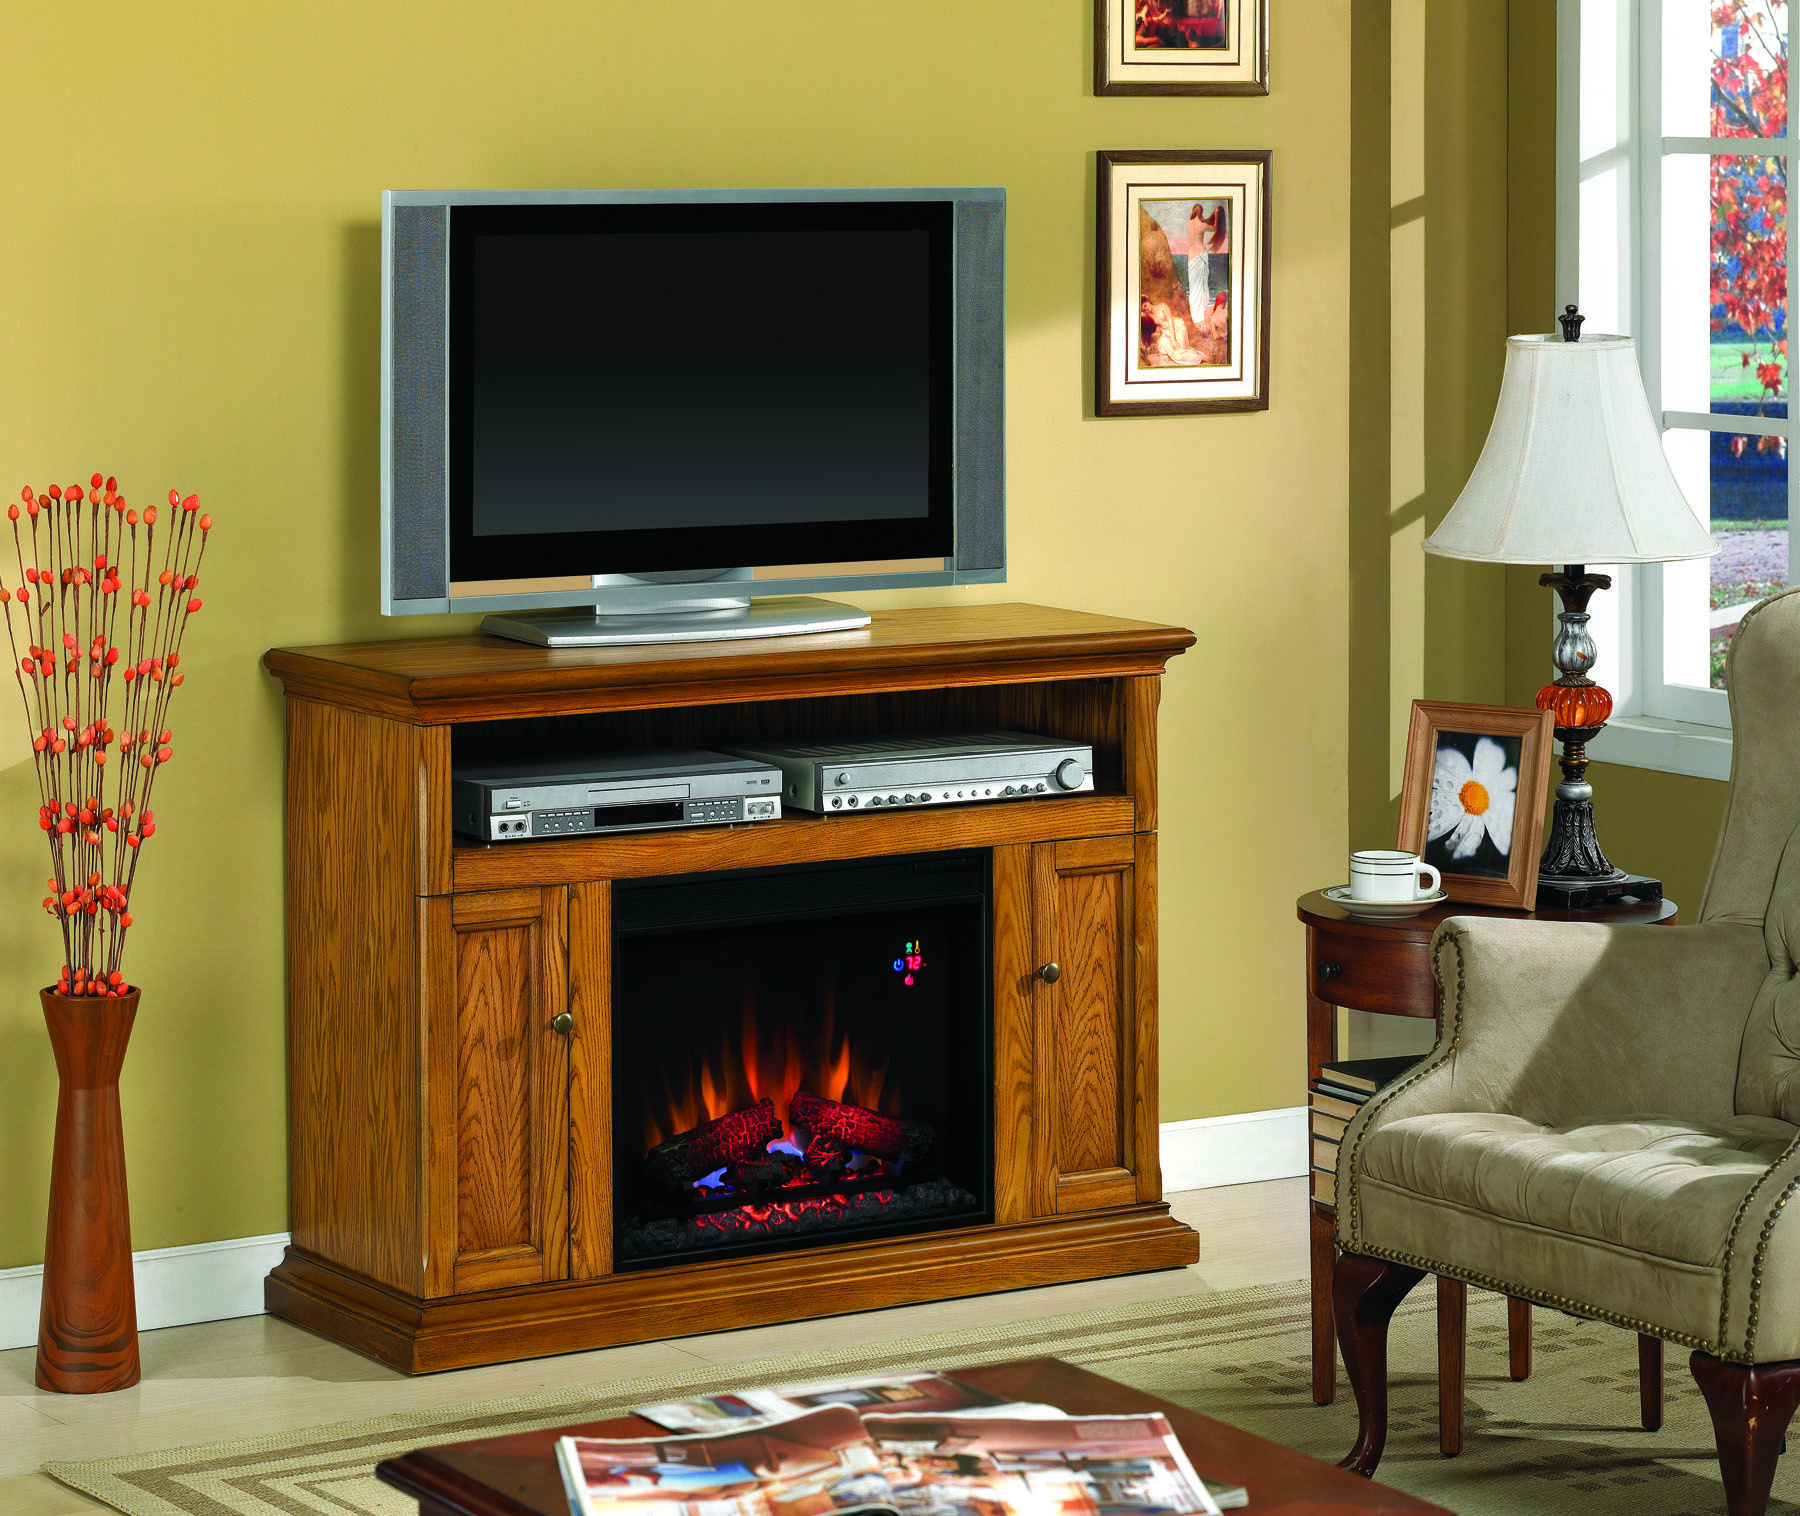 Kohls Fireplace Awesome 42 Best Rustic Fireplace Images